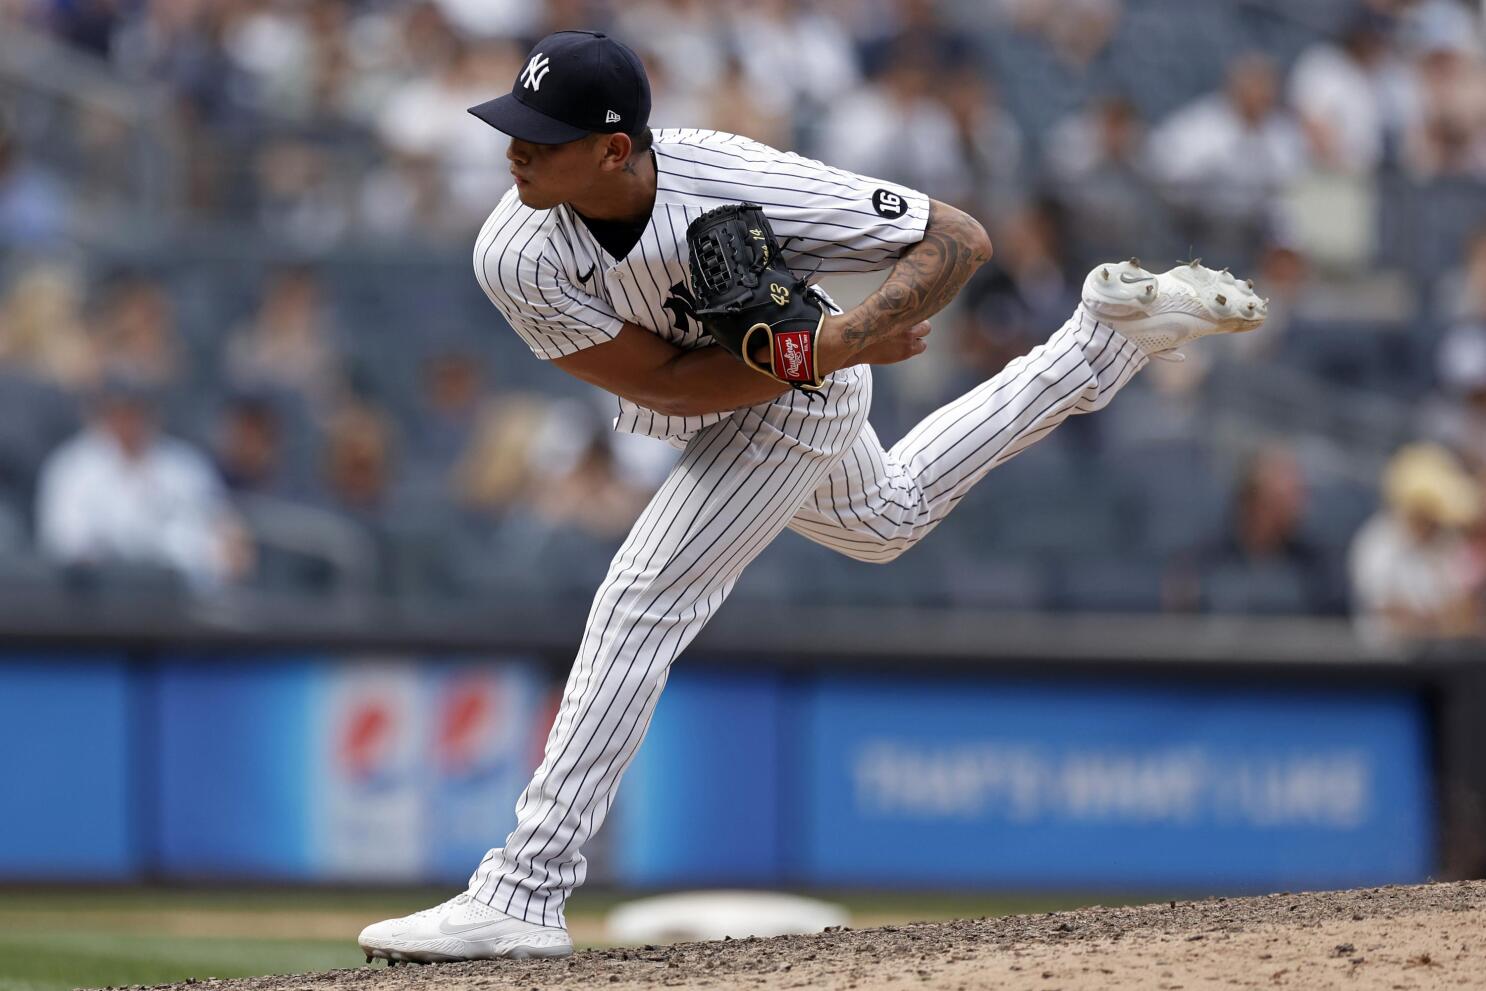 Yankees beat Mariners 5-4 for 5th straight victory